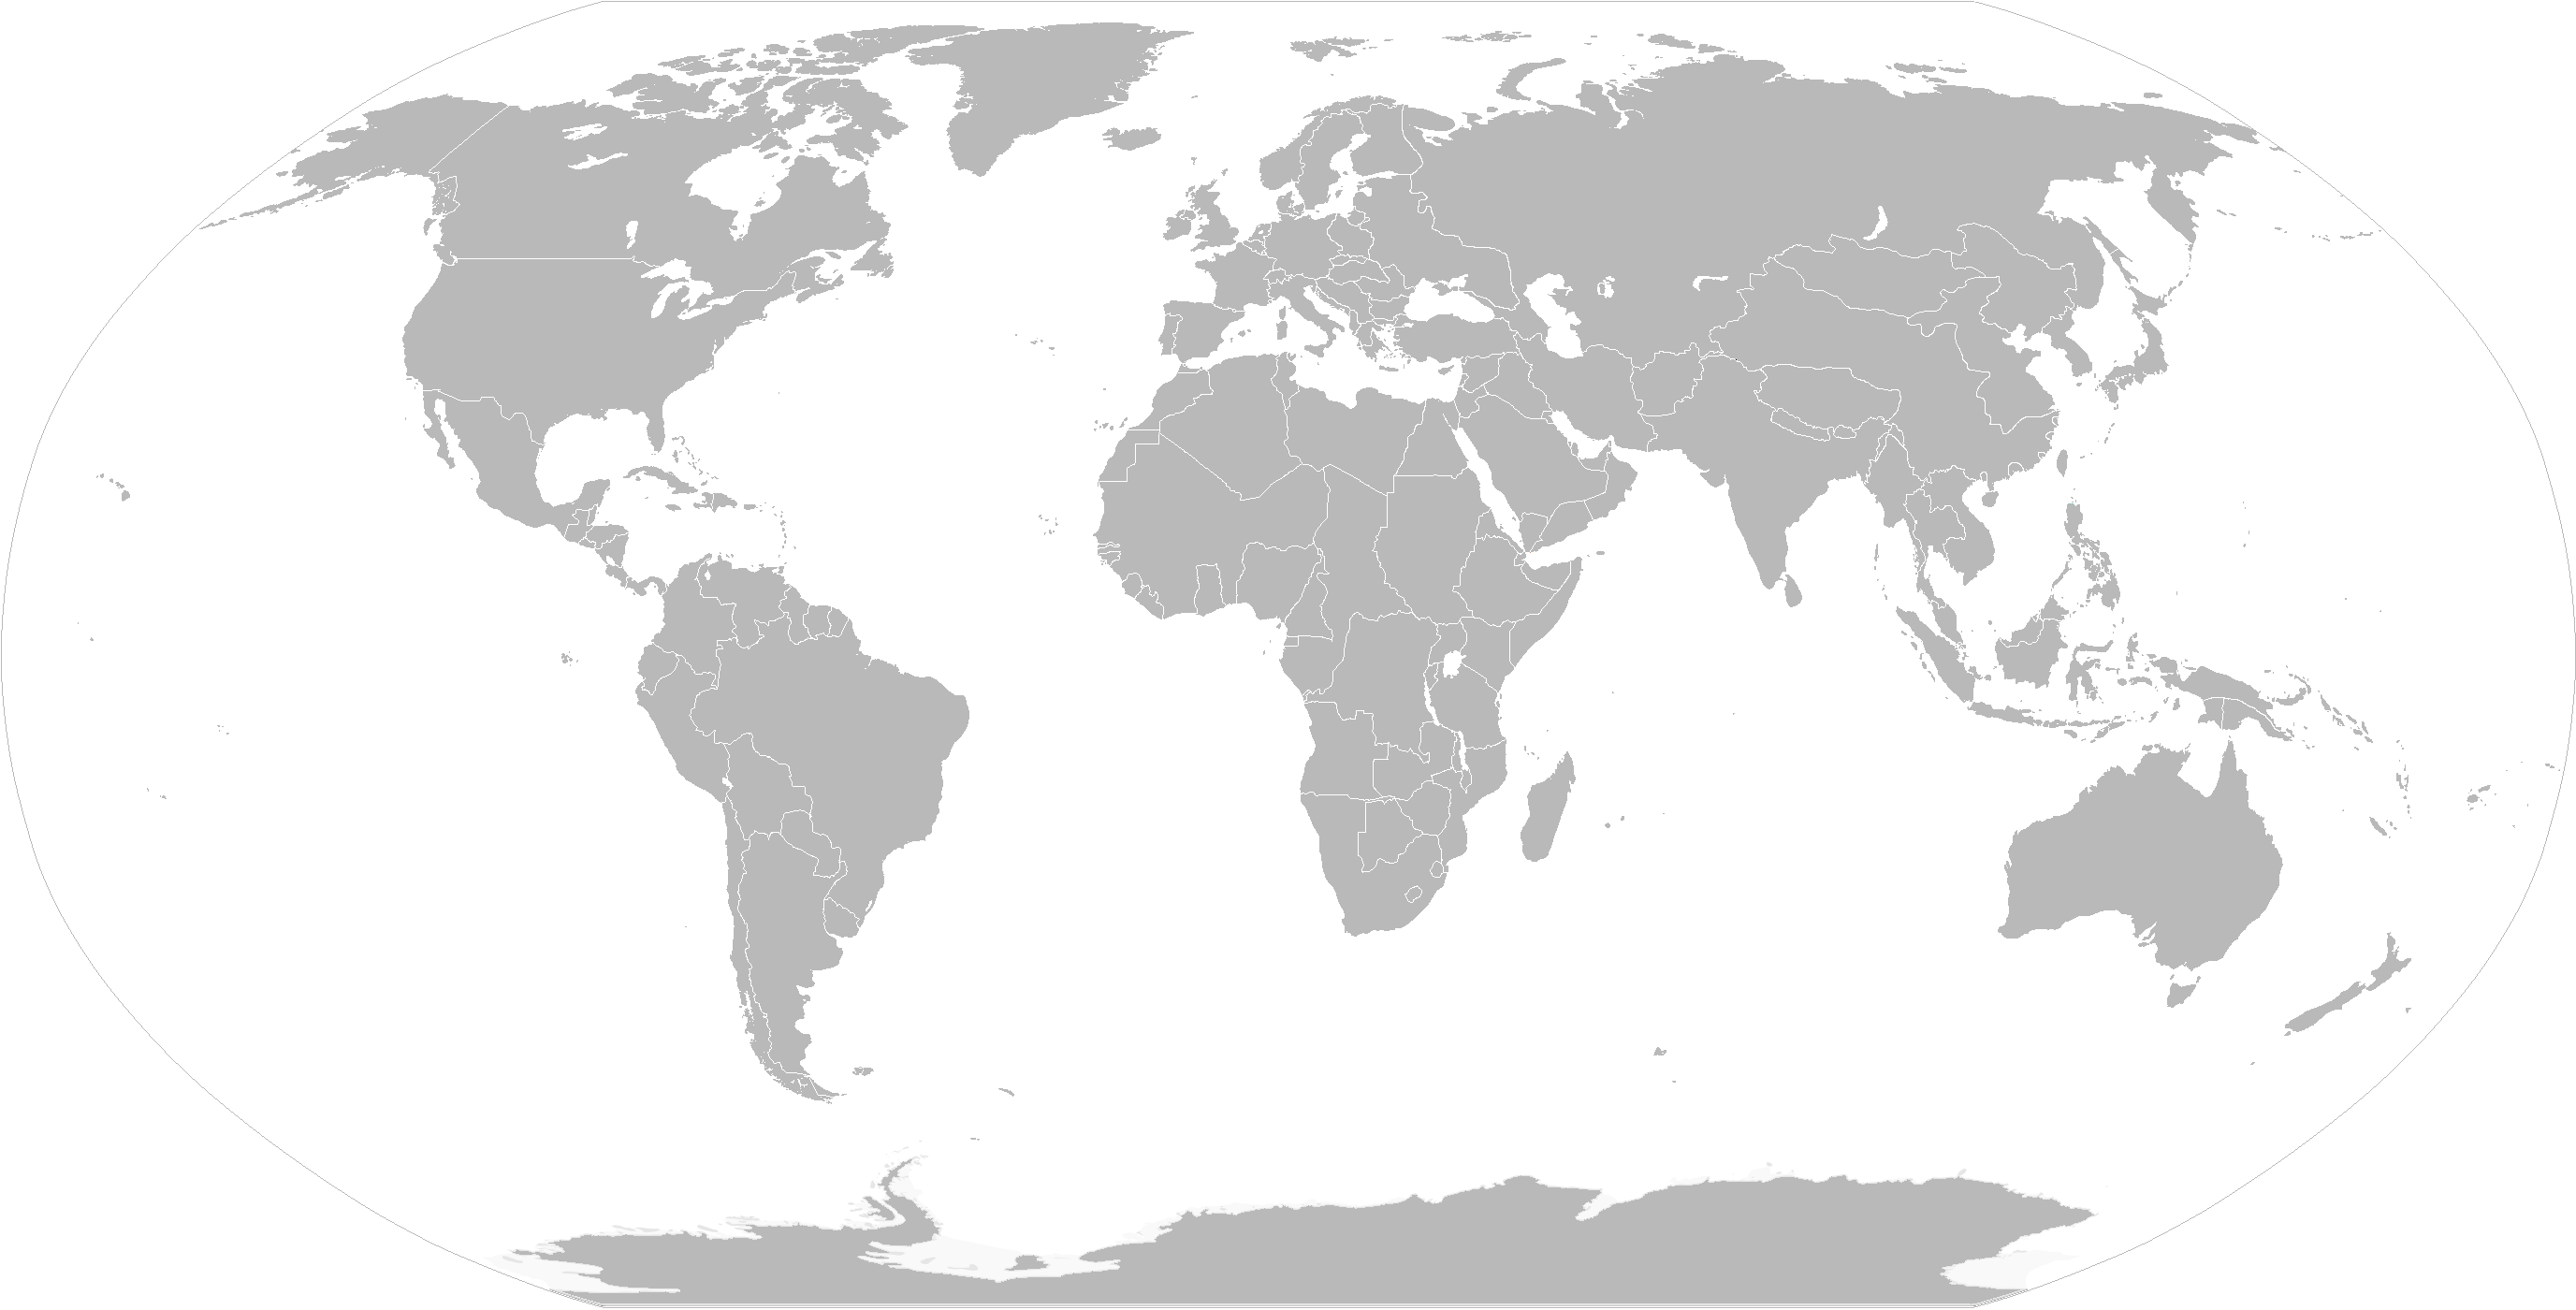 File:1942.11 blank world map.PNG.